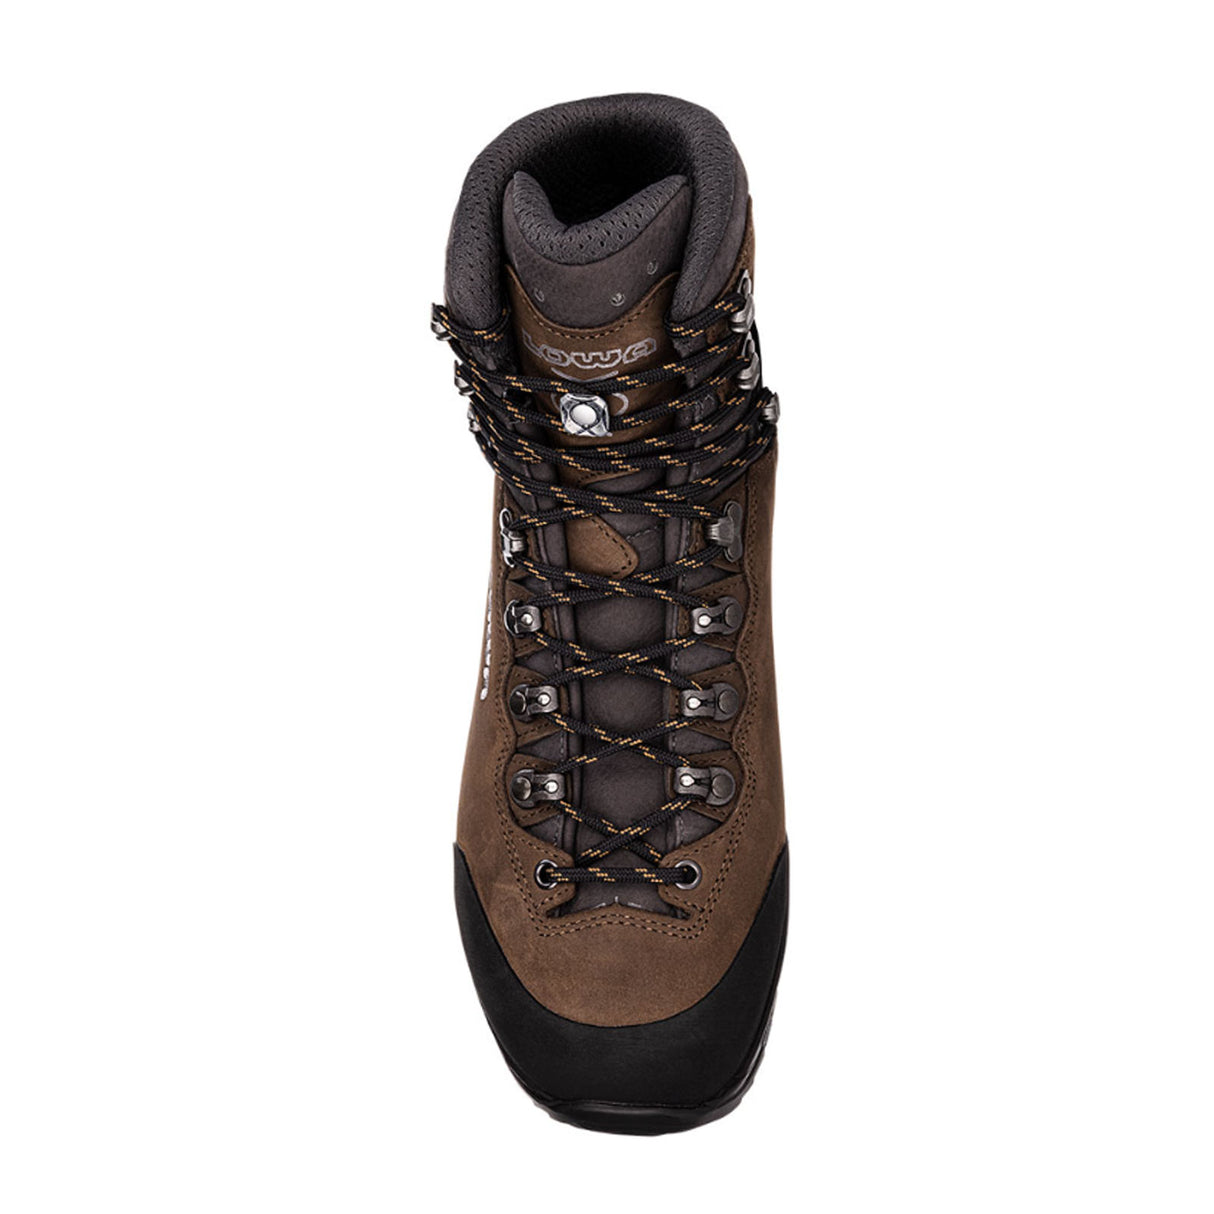 Lowa Camino EVO GTX Mid Hiking Boot (Men) - Brown/Graphite Athletic - Hiking - Mid - The Heel Shoe Fitters